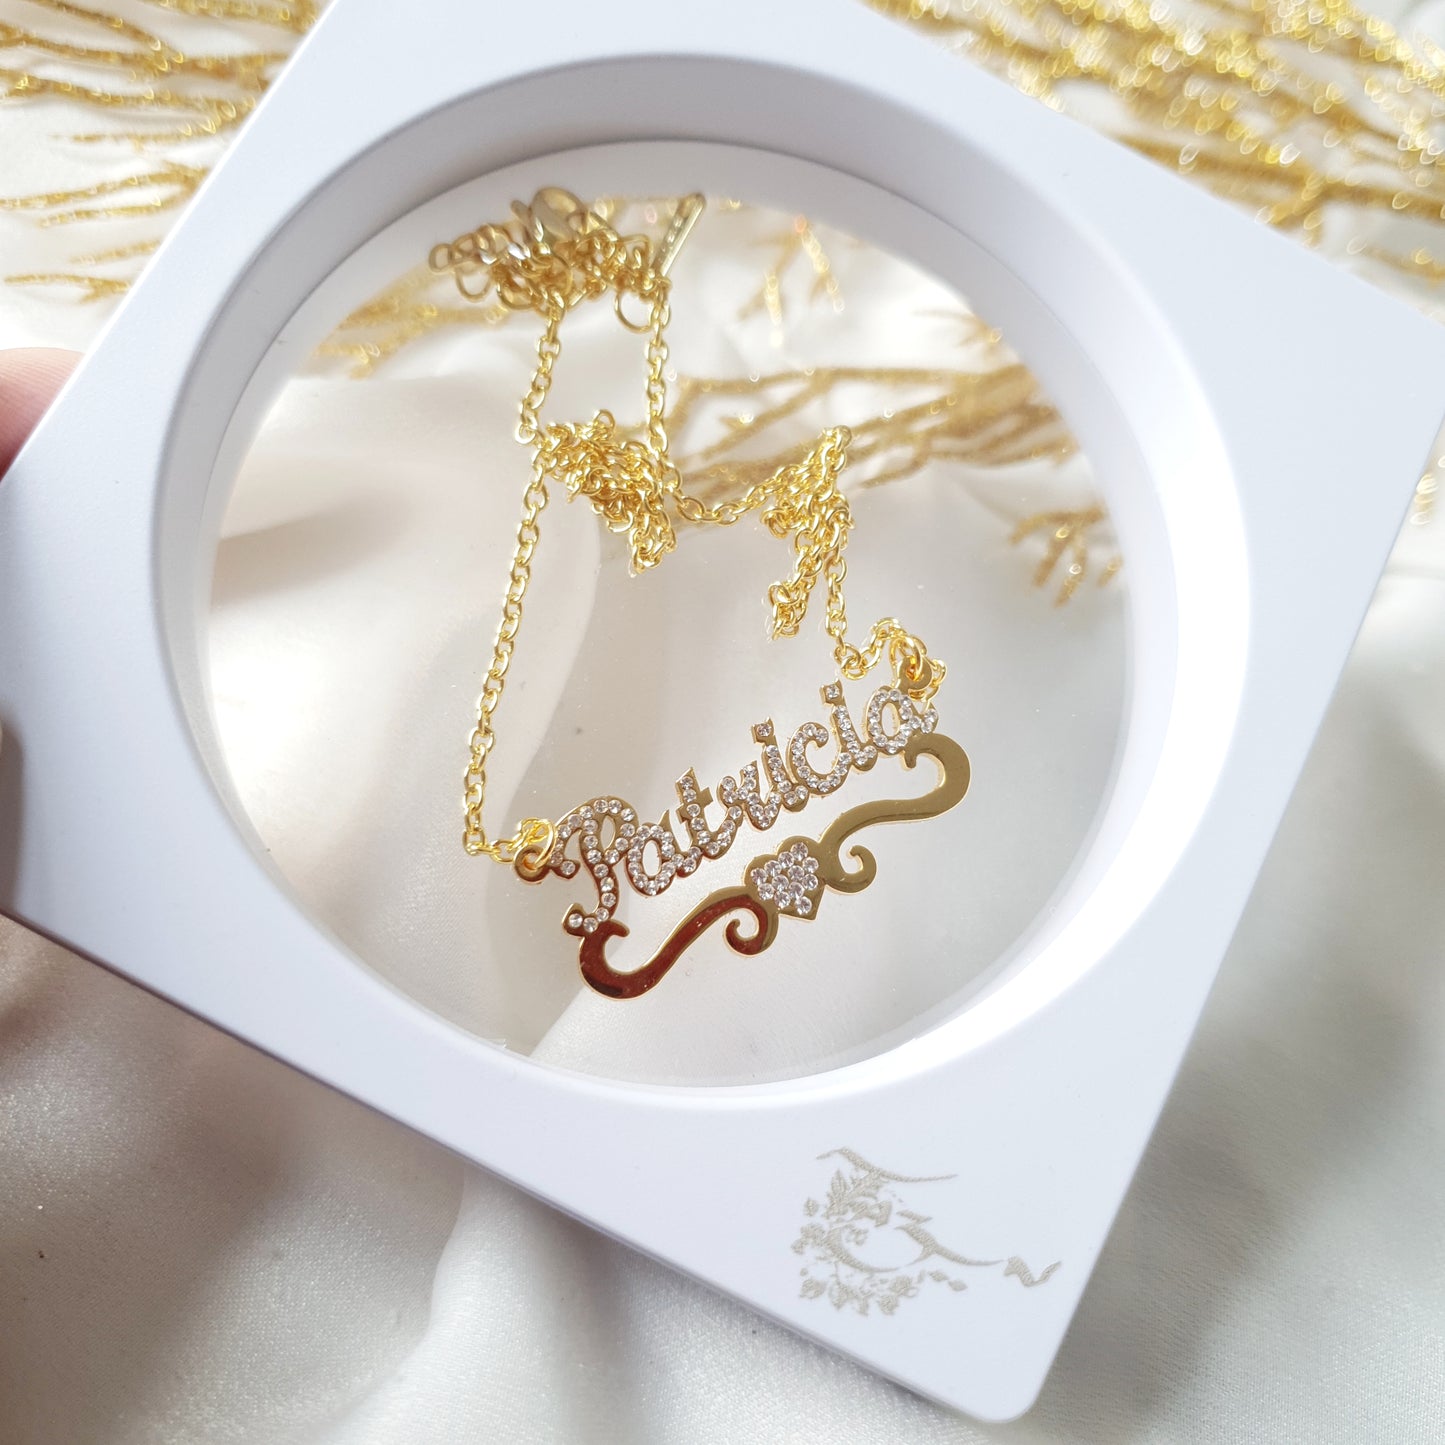 Personalised Custom Double Name Sparkling Diamante Heart with Ribbon Necklace -  Arabic English Eid Jewellery Gift - AISHAH